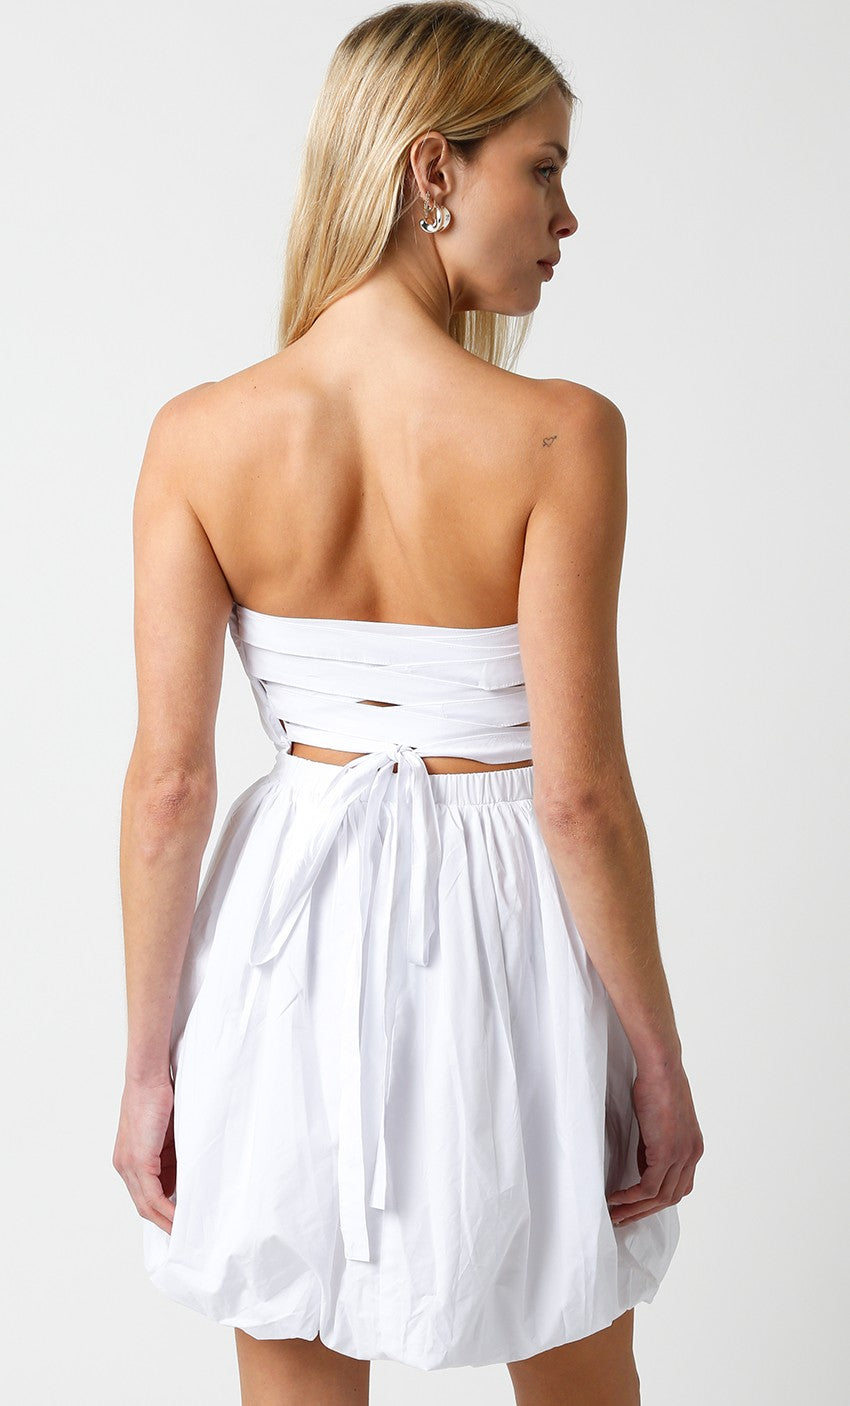 STRAPLESS DRESS WITH LACE UP BACK